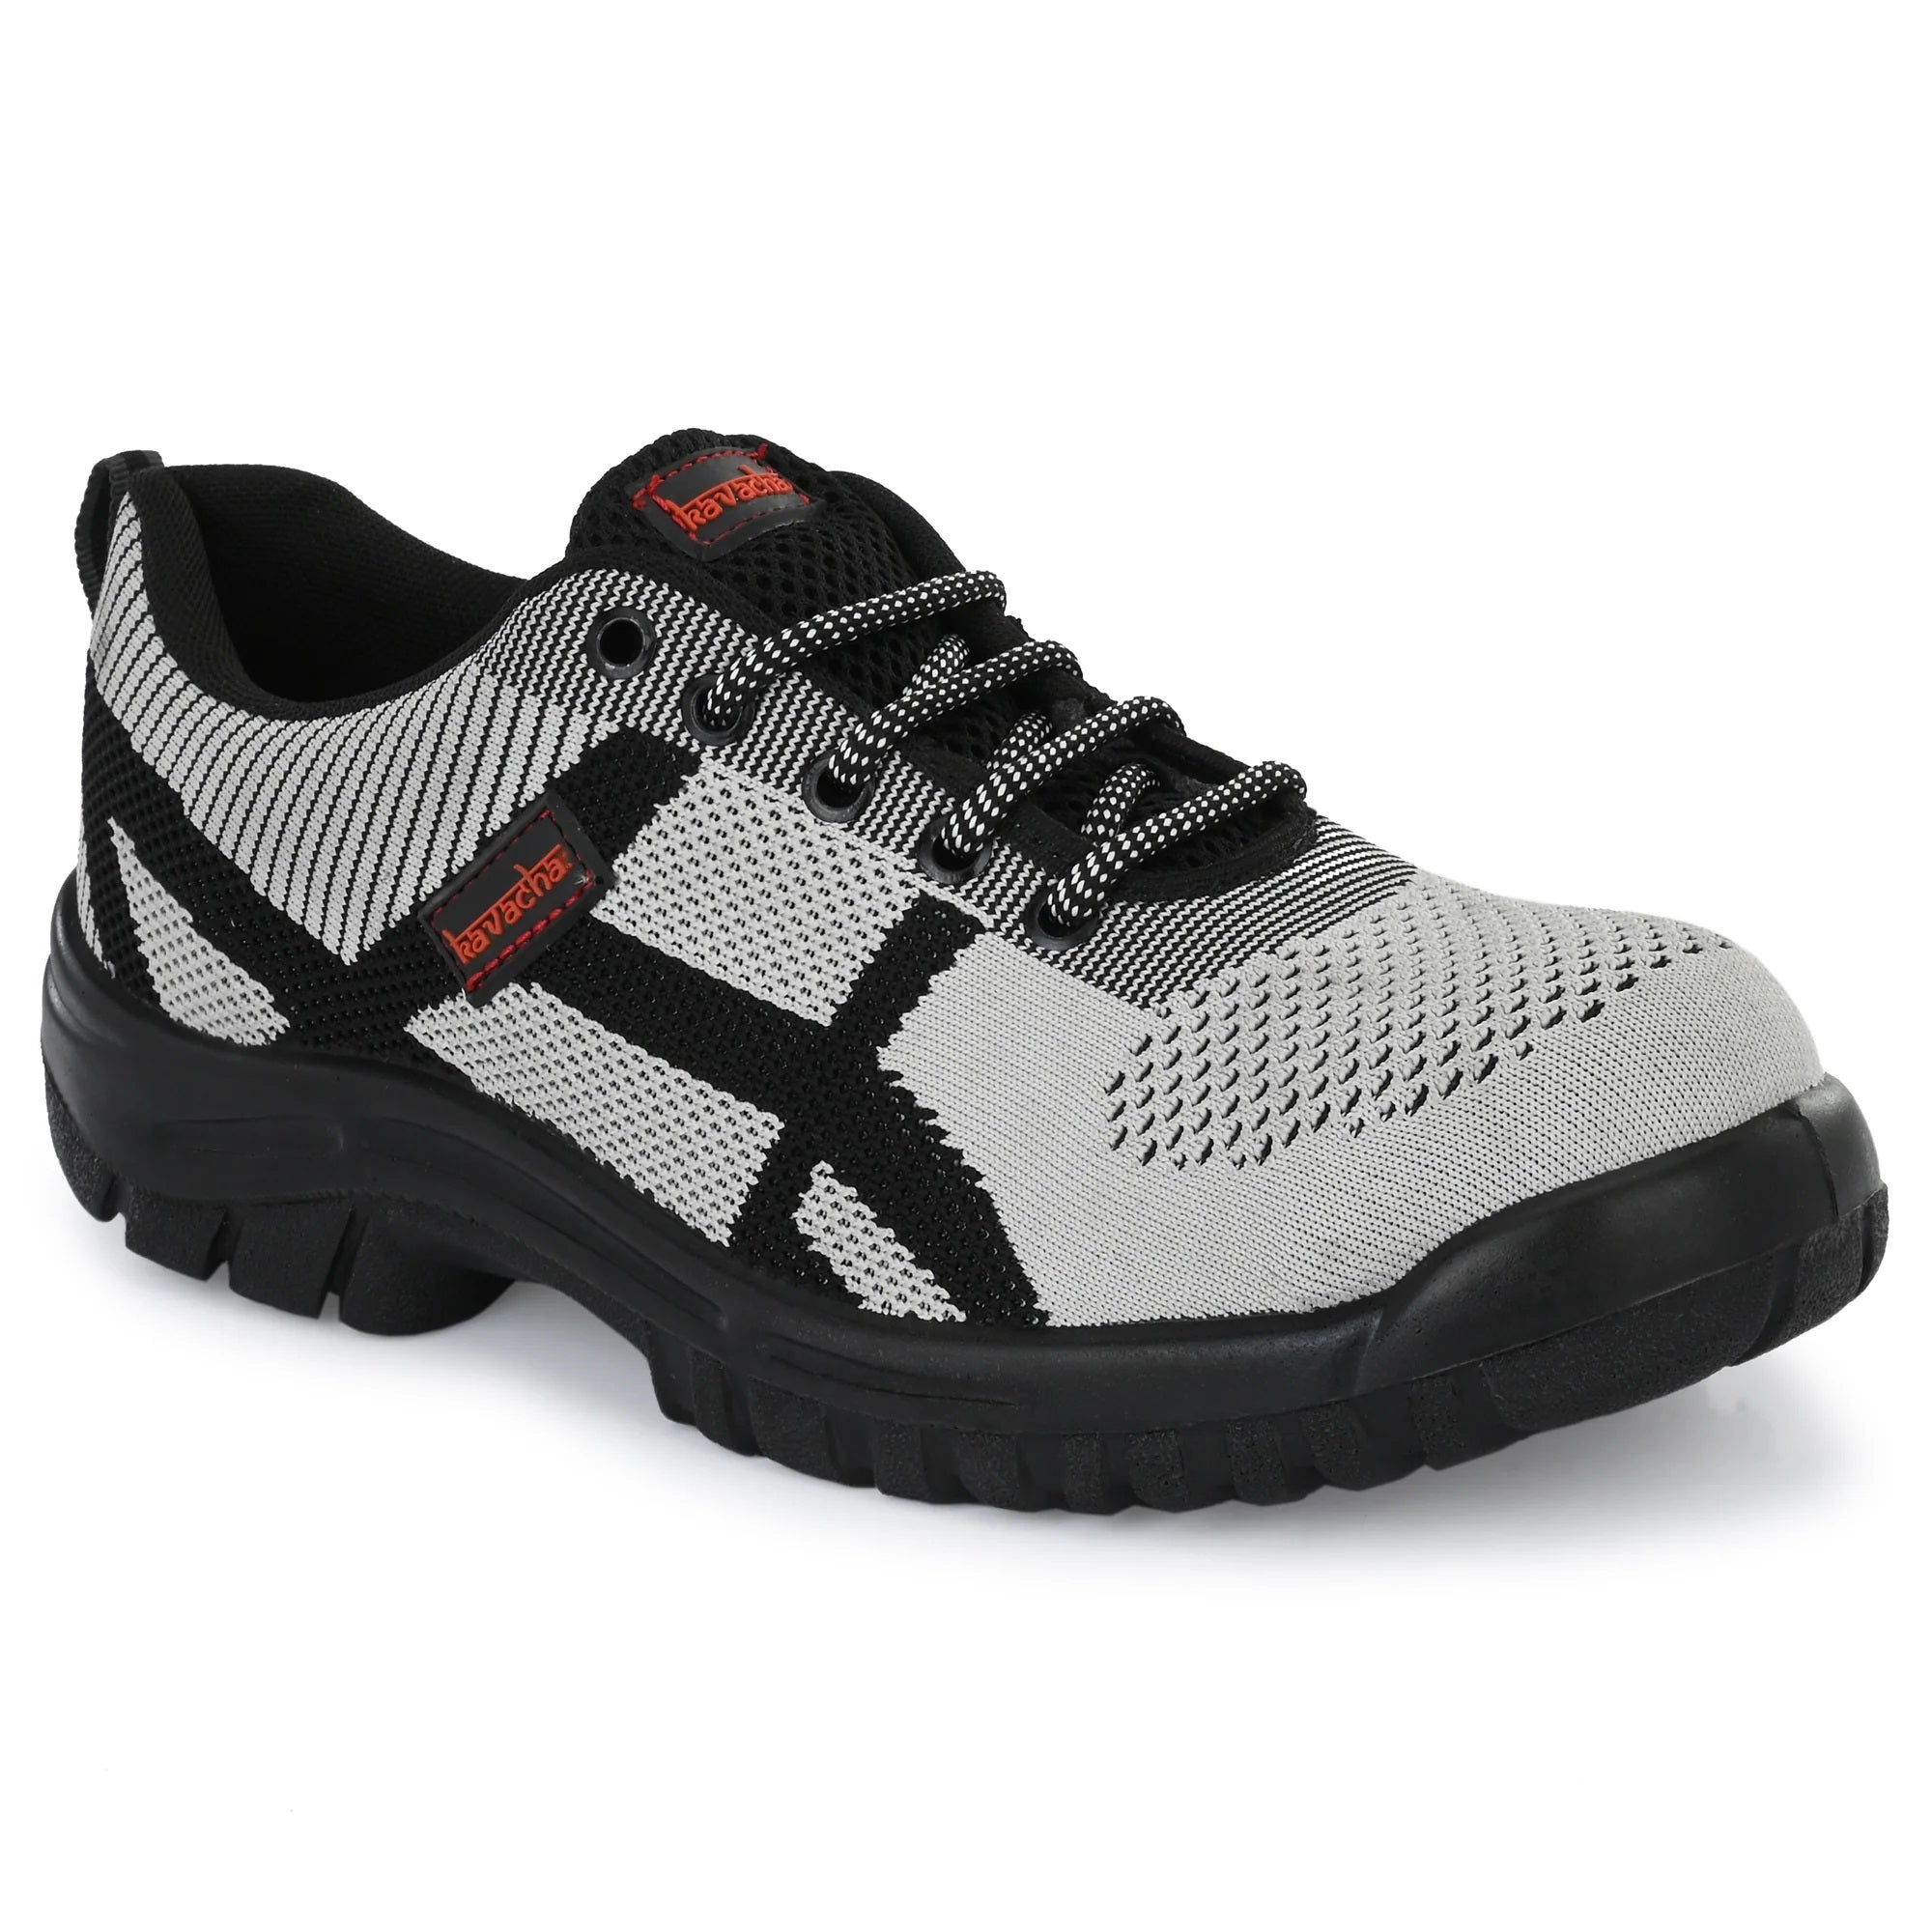 Kavacha Steel Toe Safety with Knitted Upper and PU Sole S212